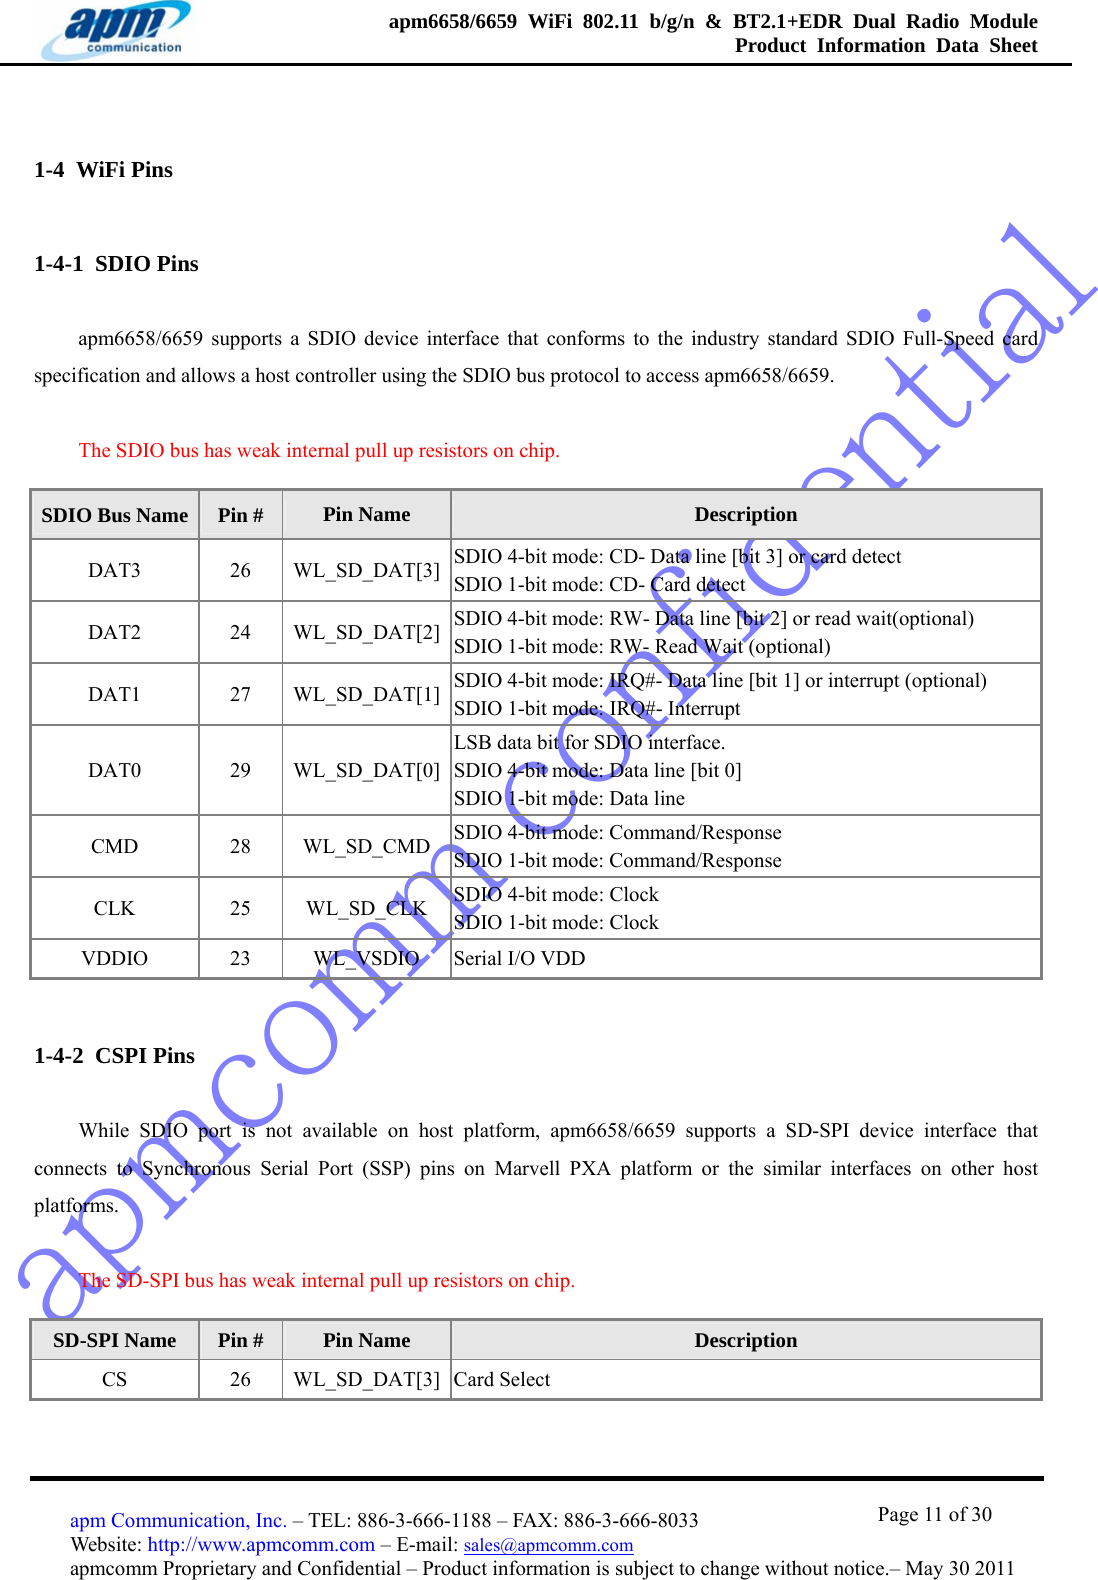 apmcomm confidentialapm6658/6659 WiFi 802.11 b/g/n &amp; BT2.1+EDR Dual Radio Module  Product Information Data Sheet                                       Page 11 of 30 apm Communication, Inc. – TEL: 886-3-666-1188 – FAX: 886-3-666-8033 Website: http://www.apmcomm.com – E-mail: sales@apmcomm.com  apmcomm Proprietary and Confidential – Product information is subject to change without notice.– May 30 2011 1-4  WiFi Pins 1-4-1  SDIO Pins apm6658/6659 supports a SDIO device interface that conforms to the industry standard SDIO Full-Speed card specification and allows a host controller using the SDIO bus protocol to access apm6658/6659.   The SDIO bus has weak internal pull up resistors on chip. SDIO Bus Name  Pin #  Pin Name  Description DAT3 26 WL_SD_DAT[3] SDIO 4-bit mode: CD- Data line [bit 3] or card detect SDIO 1-bit mode: CD- Card detect DAT2 24 WL_SD_DAT[2] SDIO 4-bit mode: RW- Data line [bit 2] or read wait(optional) SDIO 1-bit mode: RW- Read Wait (optional) DAT1 27 WL_SD_DAT[1] SDIO 4-bit mode: IRQ#- Data line [bit 1] or interrupt (optional) SDIO 1-bit mode: IRQ#- Interrupt DAT0 29 WL_SD_DAT[0]LSB data bit for SDIO interface. SDIO 4-bit mode: Data line [bit 0] SDIO 1-bit mode: Data line CMD 28 WL_SD_CMD SDIO 4-bit mode: Command/Response SDIO 1-bit mode: Command/Response CLK 25 WL_SD_CLK SDIO 4-bit mode: Clock SDIO 1-bit mode: Clock VDDIO  23  WL_VSDIO  Serial I/O VDD 1-4-2  CSPI Pins While SDIO port is not available on host platform, apm6658/6659 supports a SD-SPI device interface that connects to Synchronous Serial Port (SSP) pins on Marvell PXA platform or the similar interfaces on other host platforms. The SD-SPI bus has weak internal pull up resistors on chip. SD-SPI Name  Pin #  Pin Name  Description CS 26 WL_SD_DAT[3] Card Select 